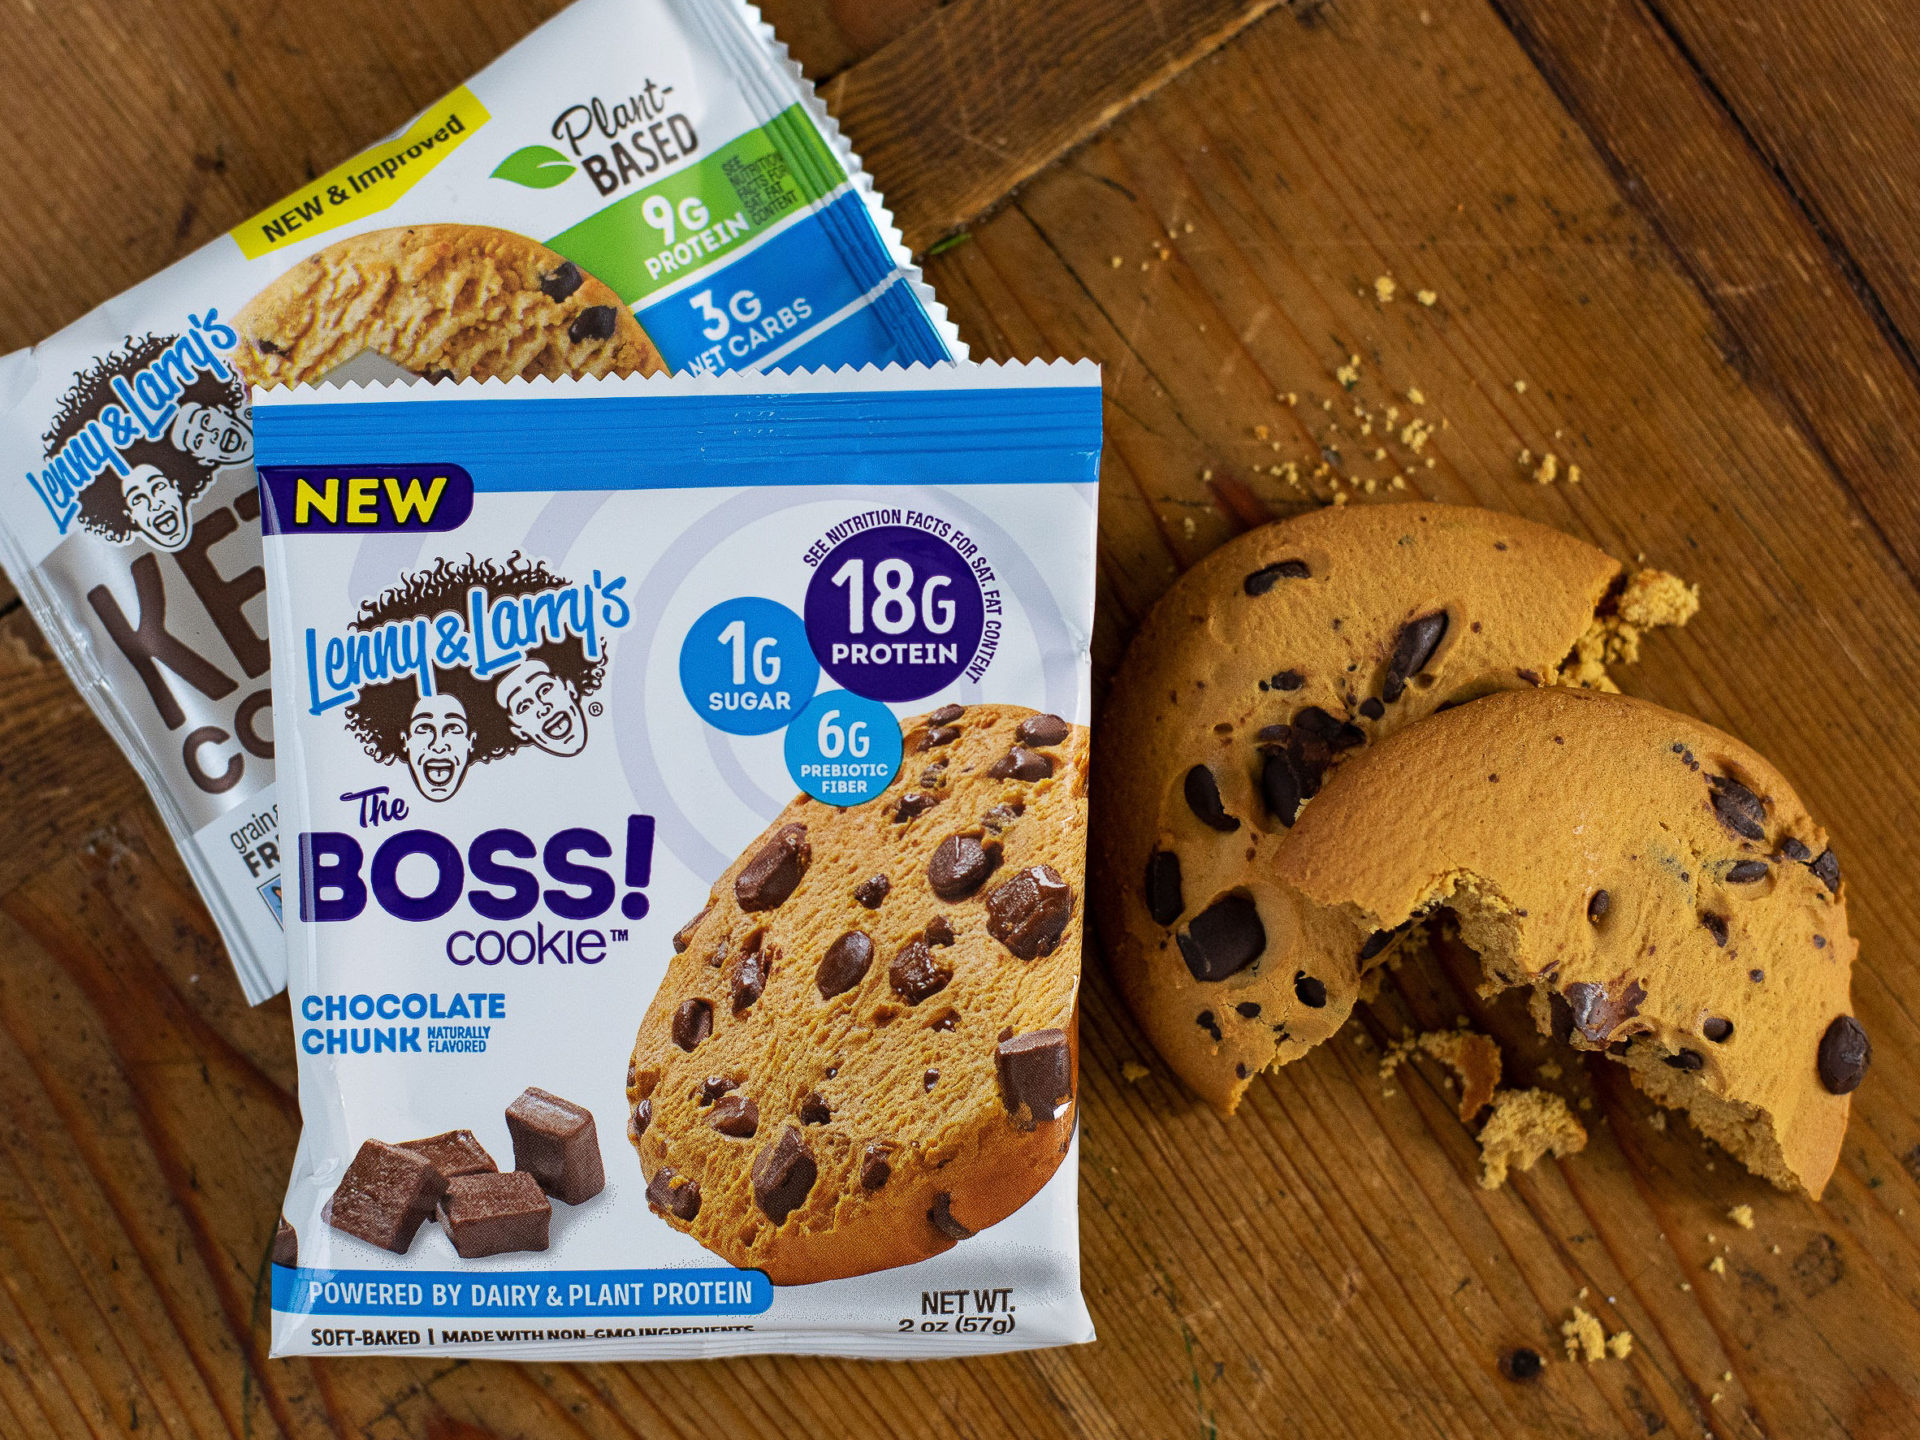 Lenny & Larry’s Deals At Kroger – Get The Complete Cookie-fied Bars For Just 50¢ (Plus Cheap Cookies!)